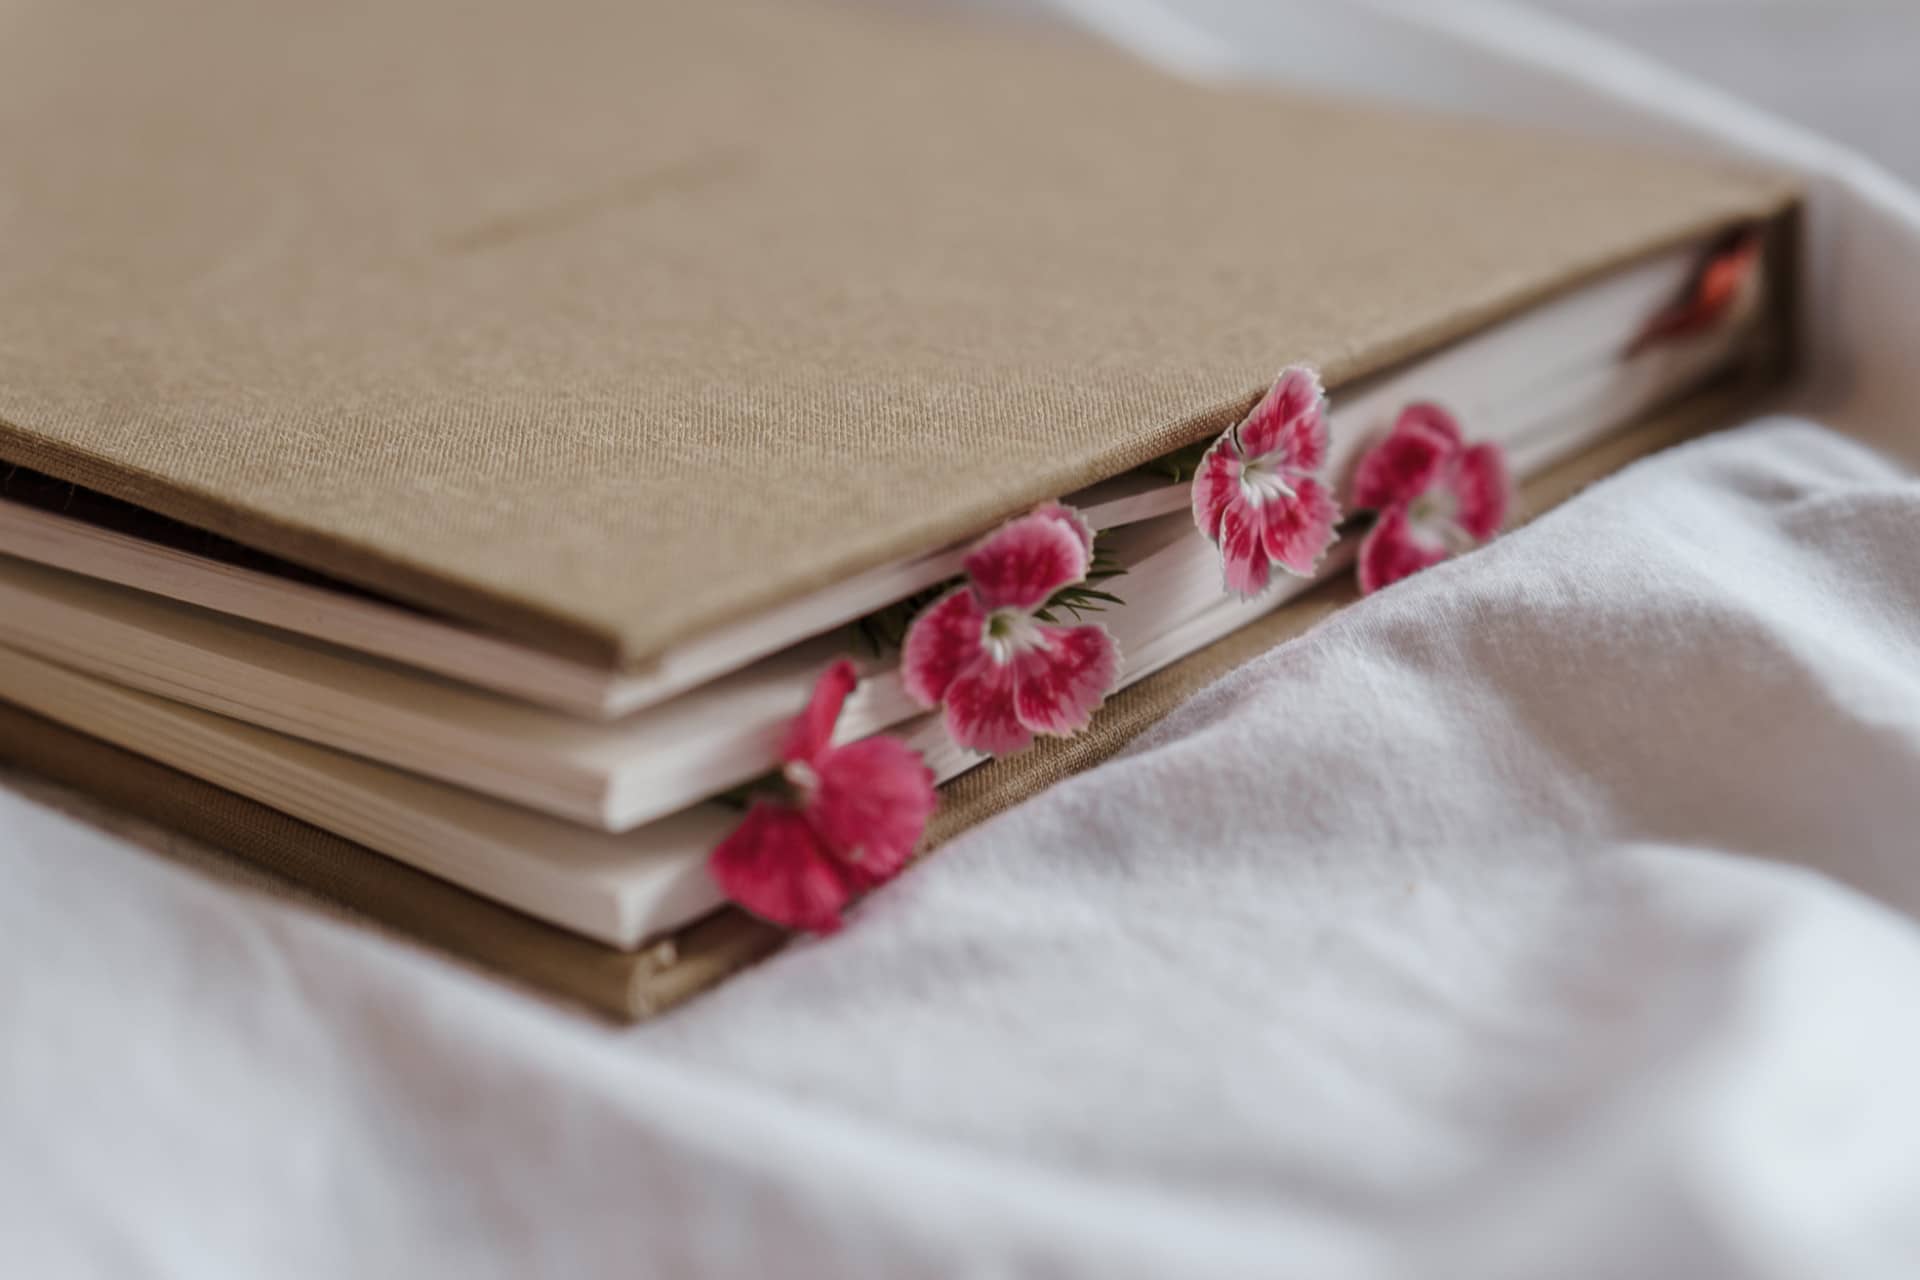 Closed notebook with beige cloth binding and four pink flowers stacked inside